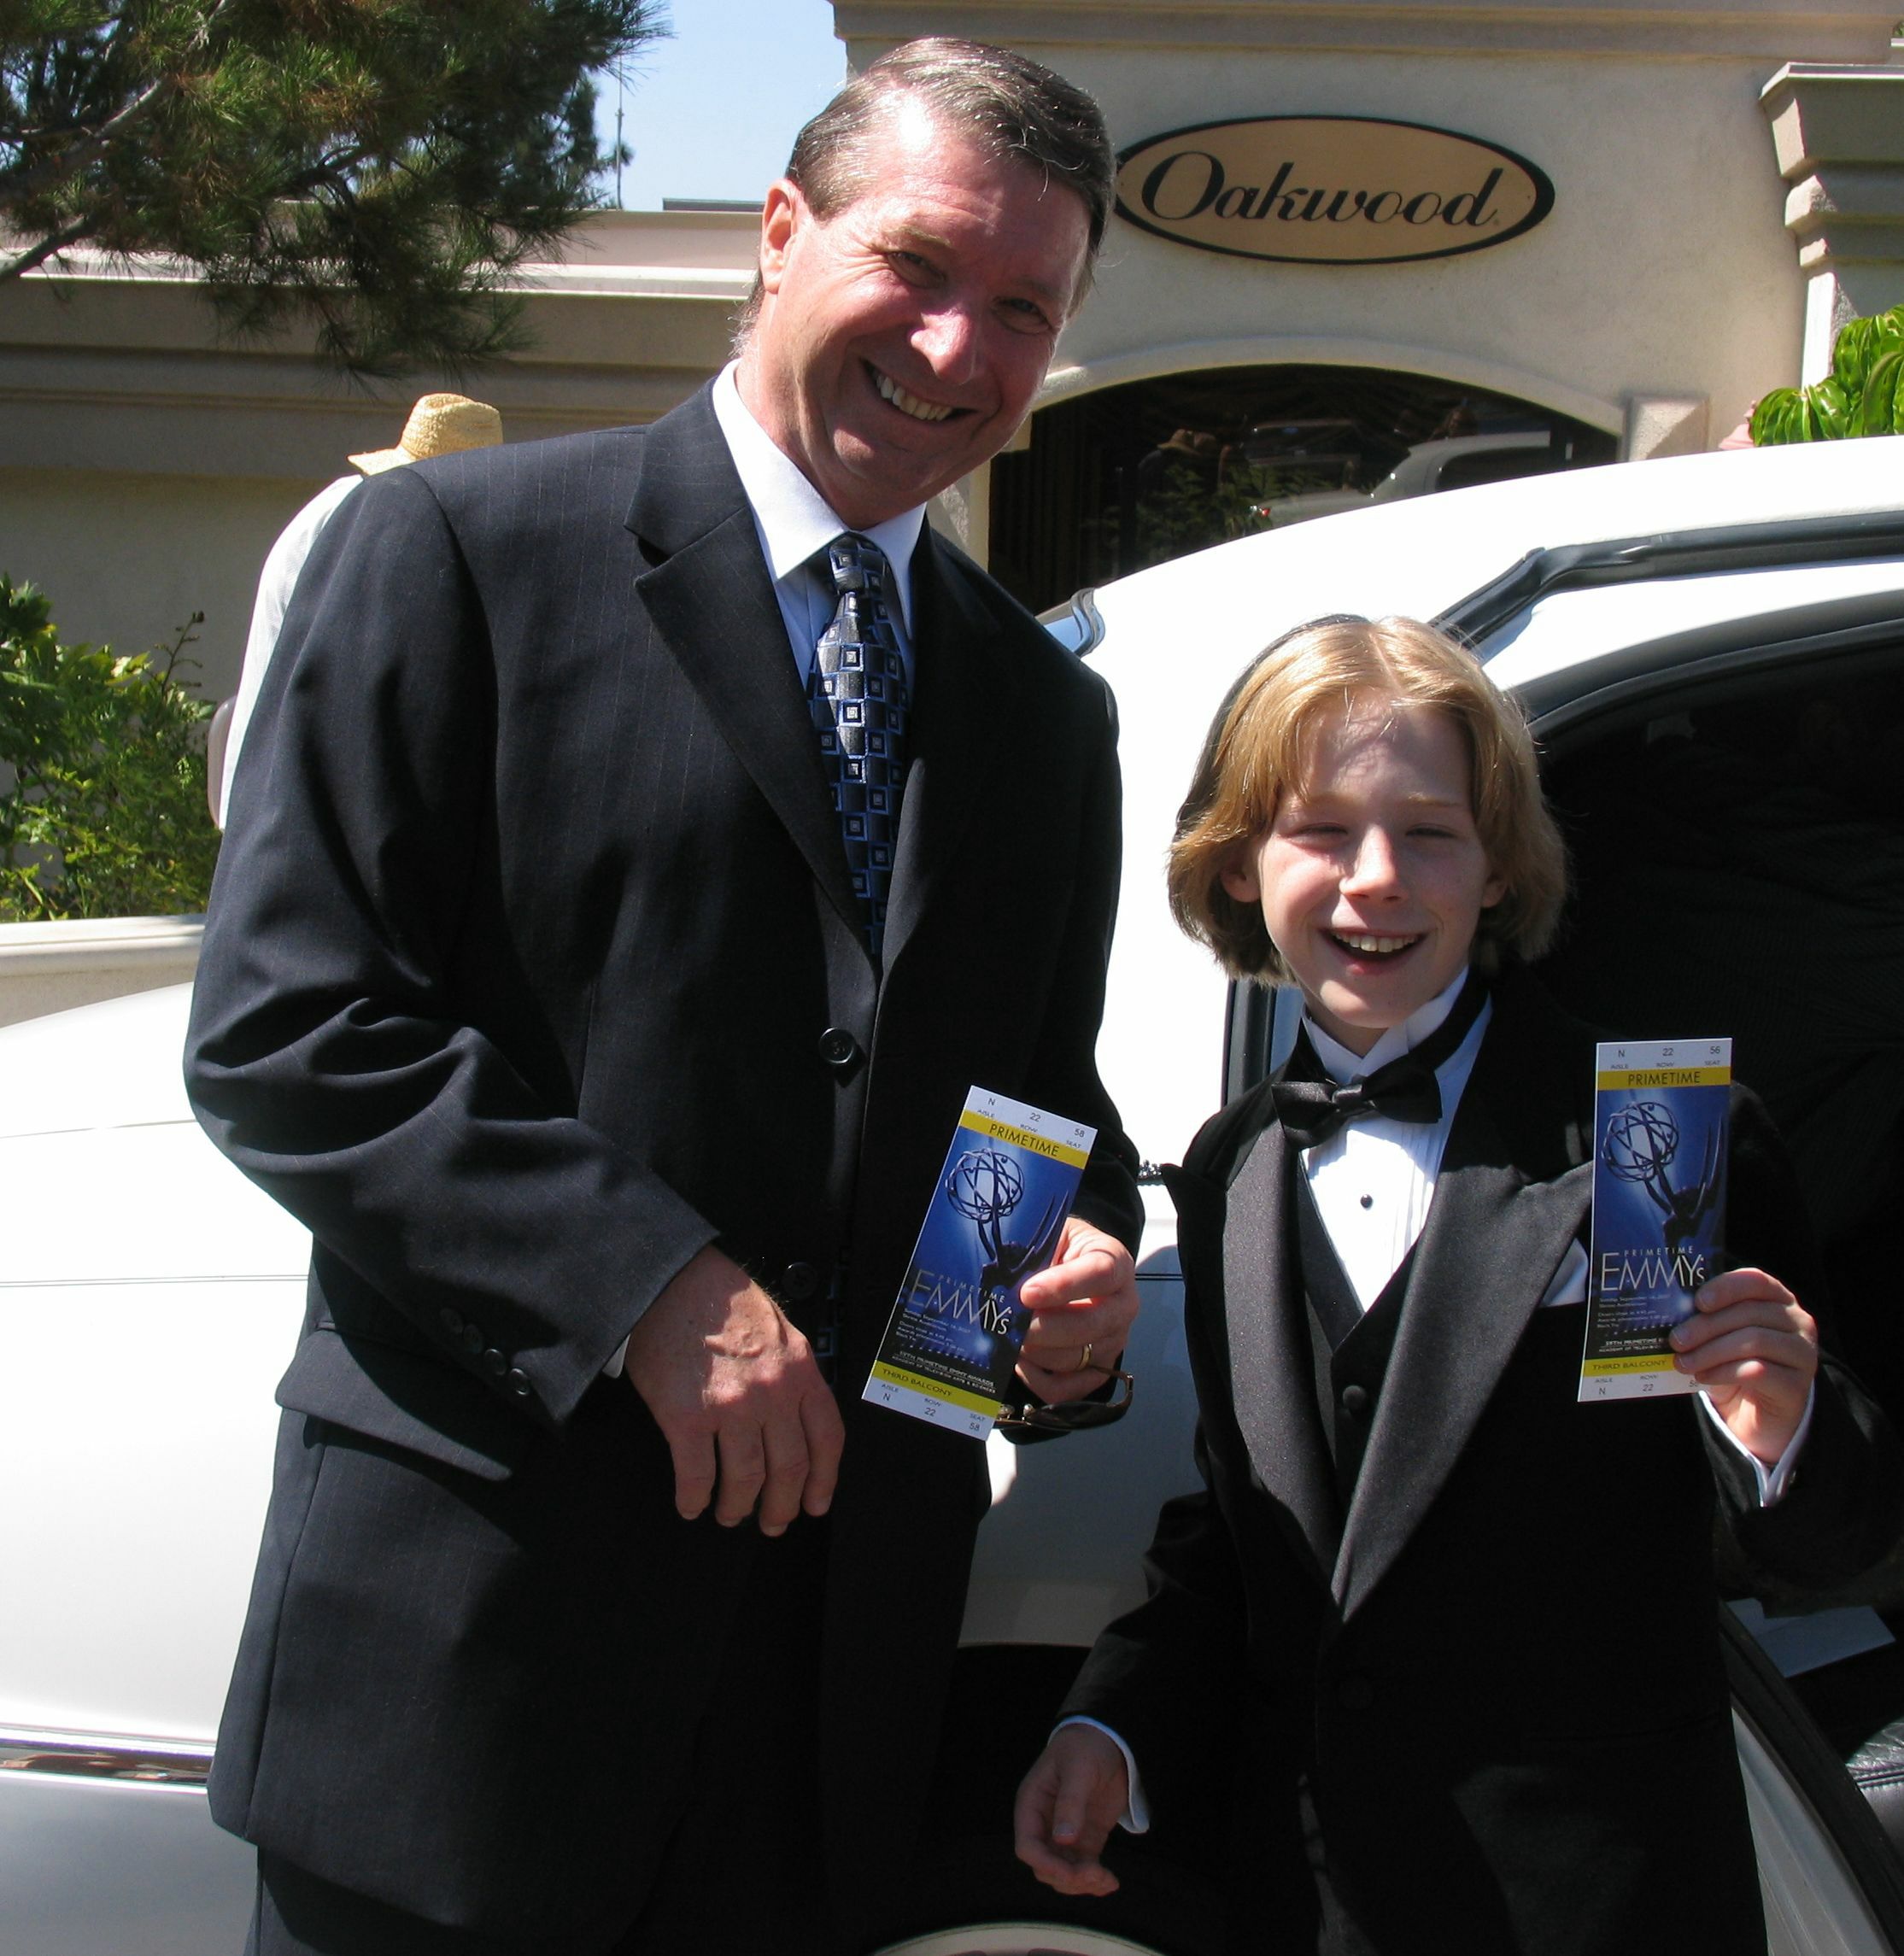 Joey Luthman and father, Richard Luthman on the way to the Emmys in 2007